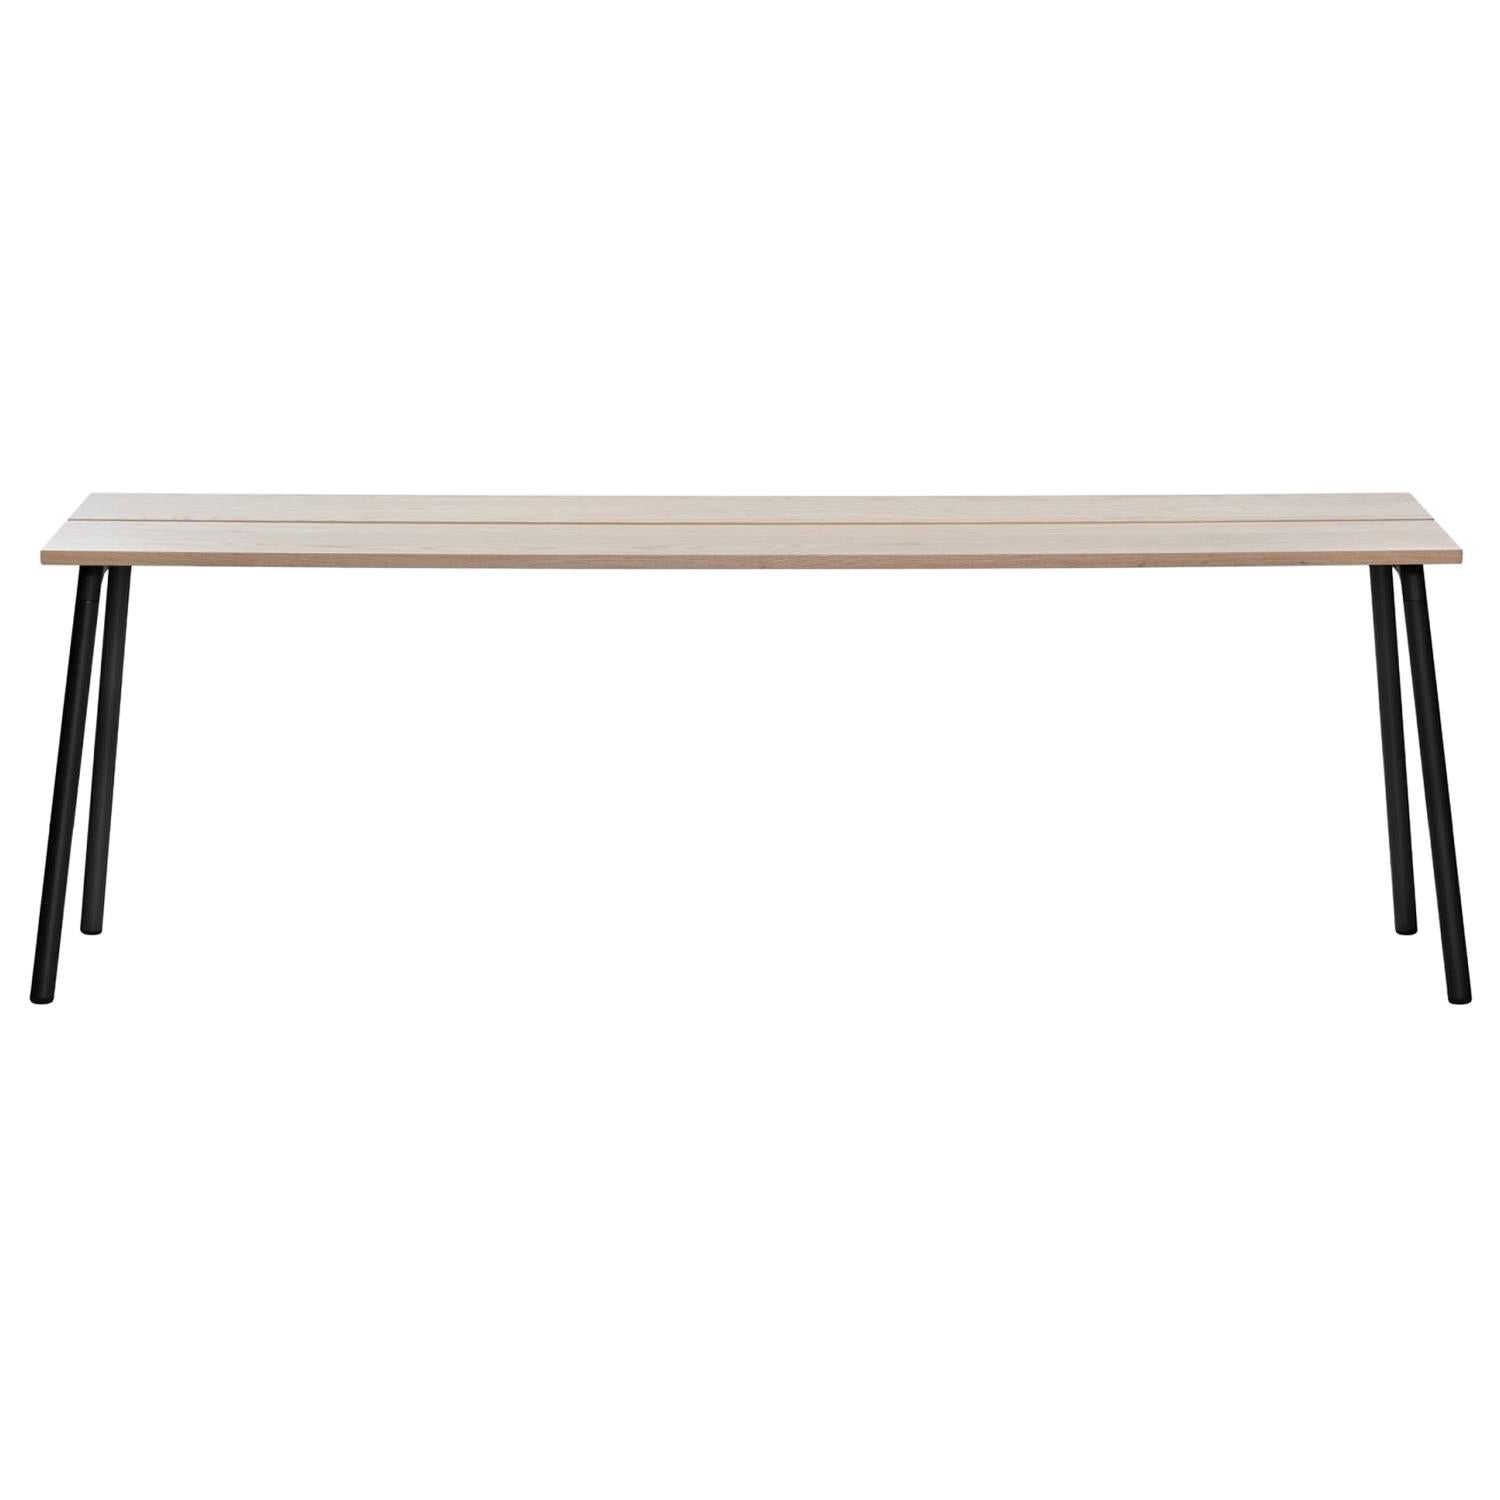 Emeco Run Large Side Table in Black Powder-Coat & Ash by Sam Hecht + Kim Colin For Sale